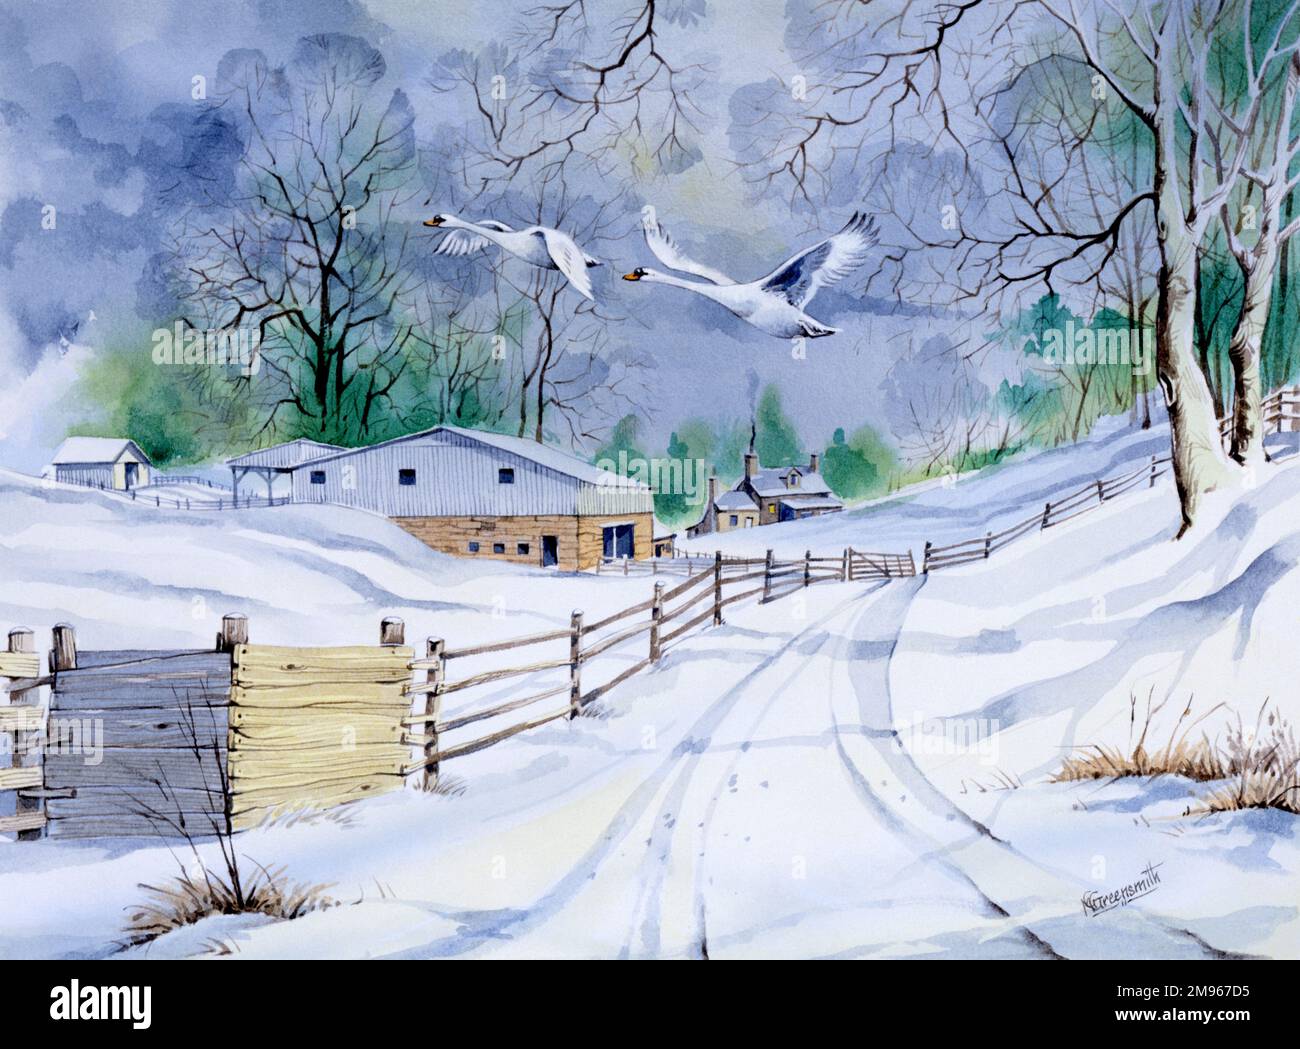 A snow-covered country lane in winter, with two flying swans. Stock Photo